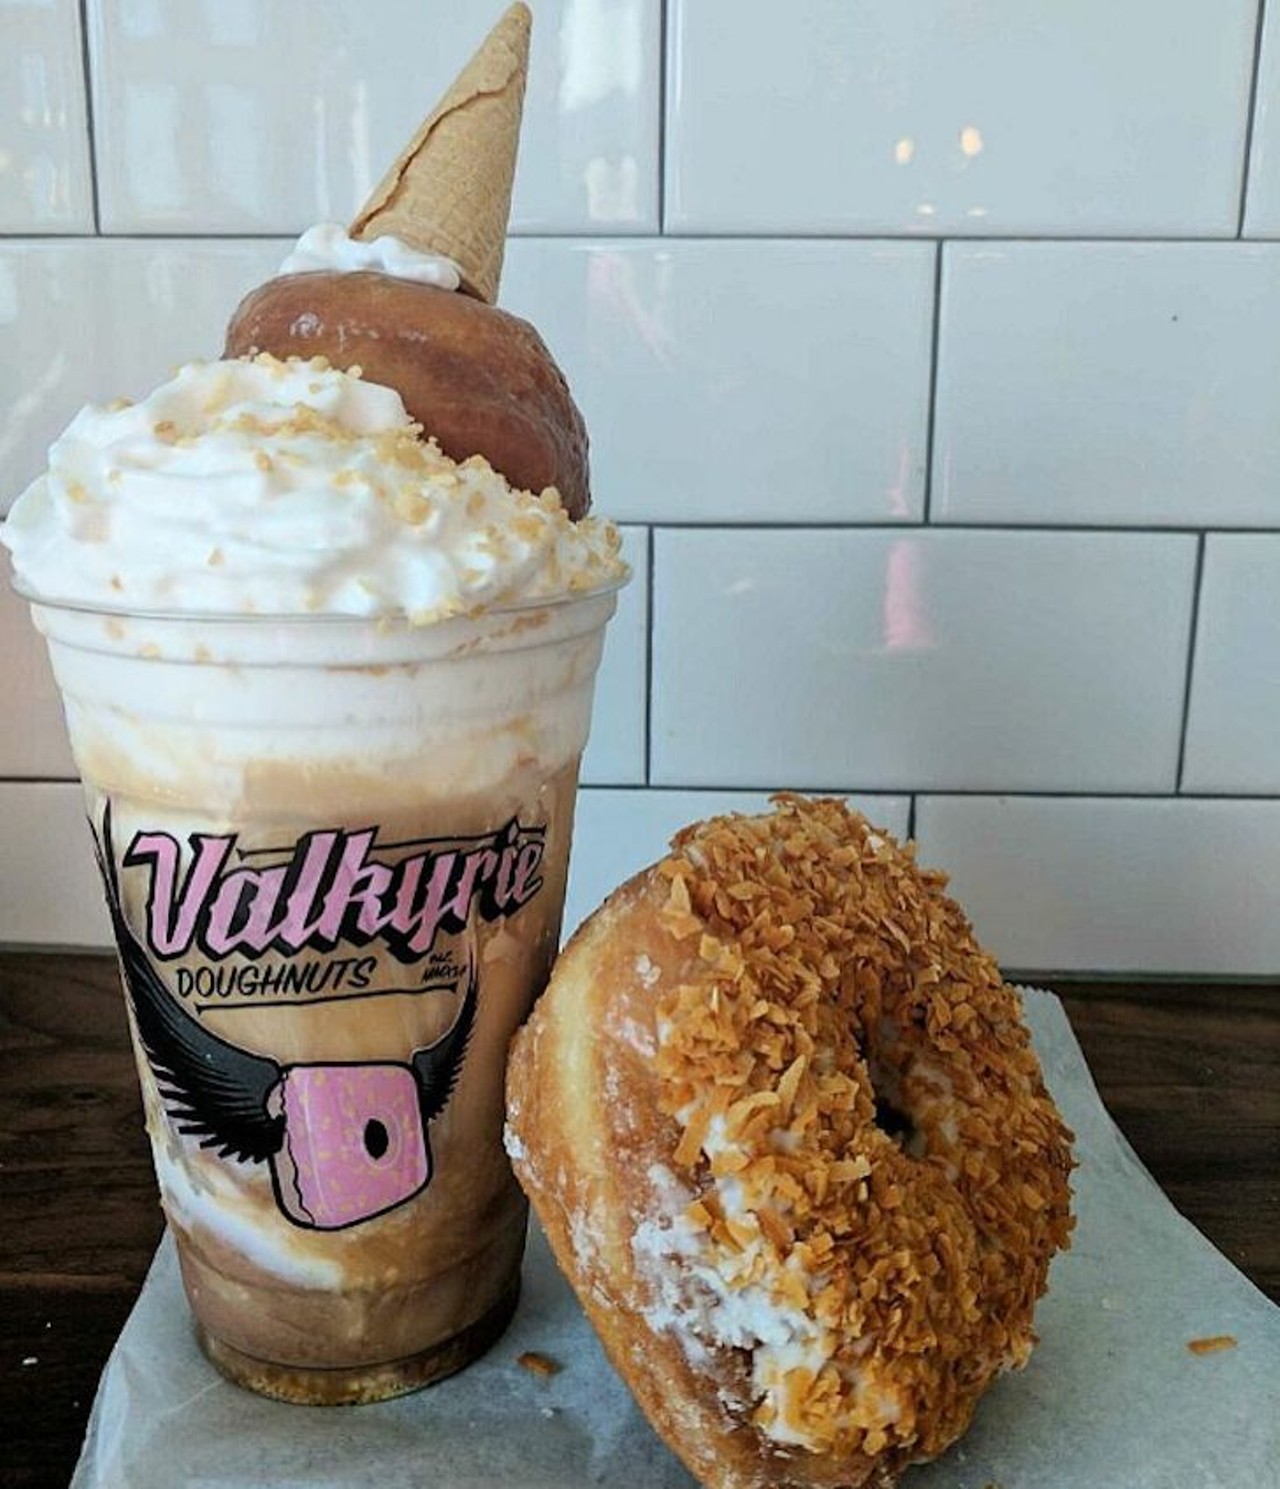 Bullshit Blend at Valkyrie 
12226 Corporate Blvd. Ste. 160, 407-999-9799 
The Bullshit Blend is the perfect treat for a hot day. The blend will always have vegan soft serve mixed with coffee or a flavored sparkling drink topped with whipped cream, a tiny doughnut, and a cone, but the dessert is a different creation every time. Make sure to check out Valkyrie's Instagram account to see what the Bullshit Blend flavor of the day is.  
Photo via valkyriedoughnuts/Instagram